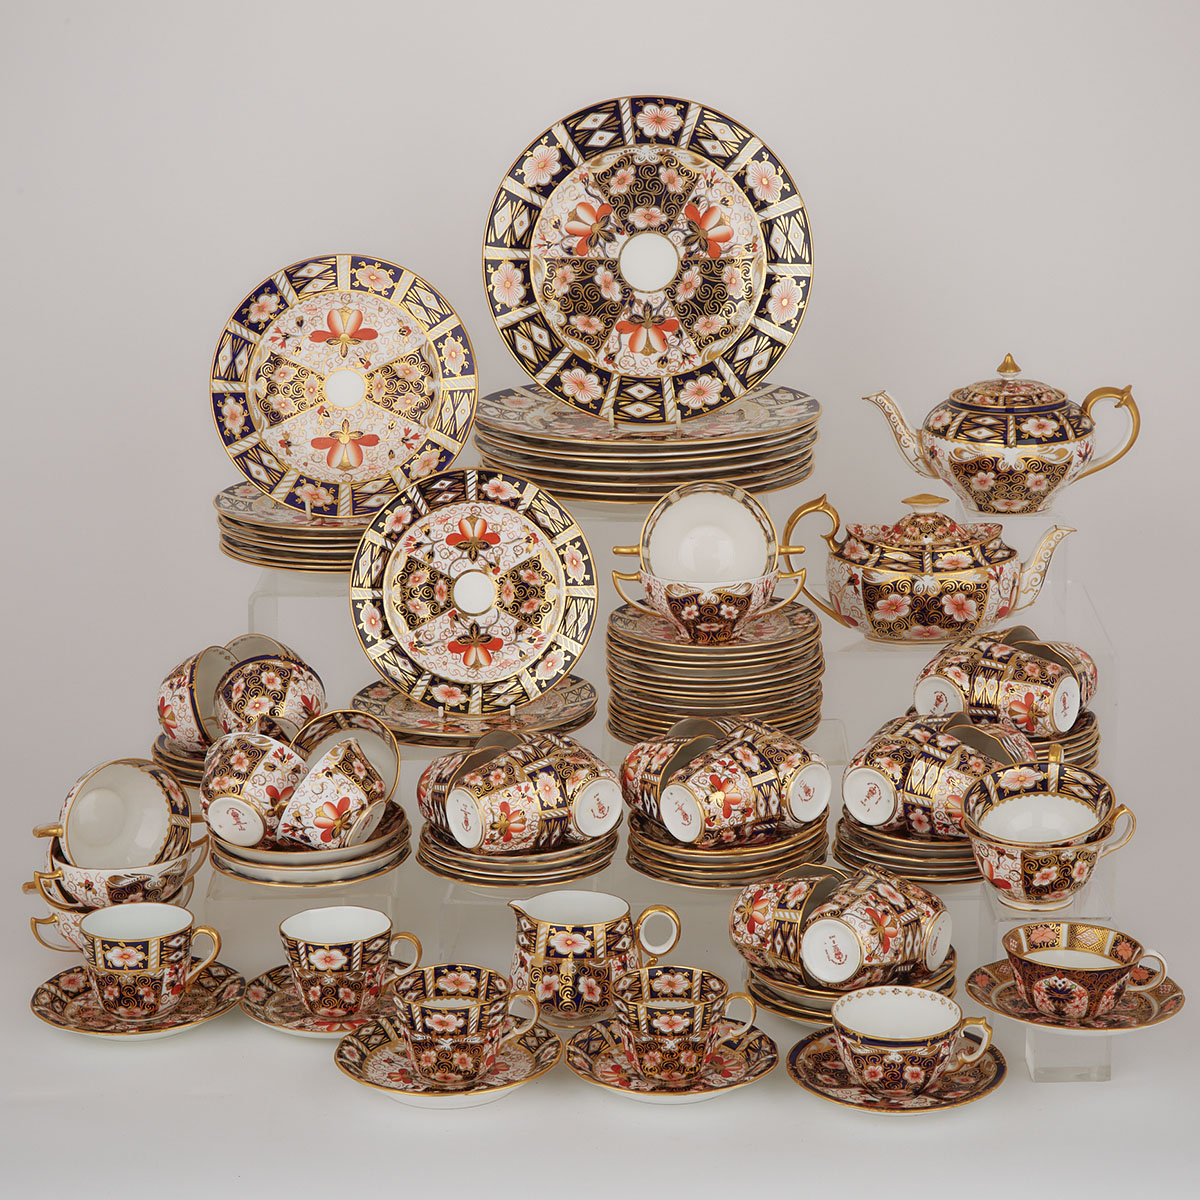 Group of Royal Crown Derby Mainly ‘Imari’ (2451) Pattern Tablewares, 20th century